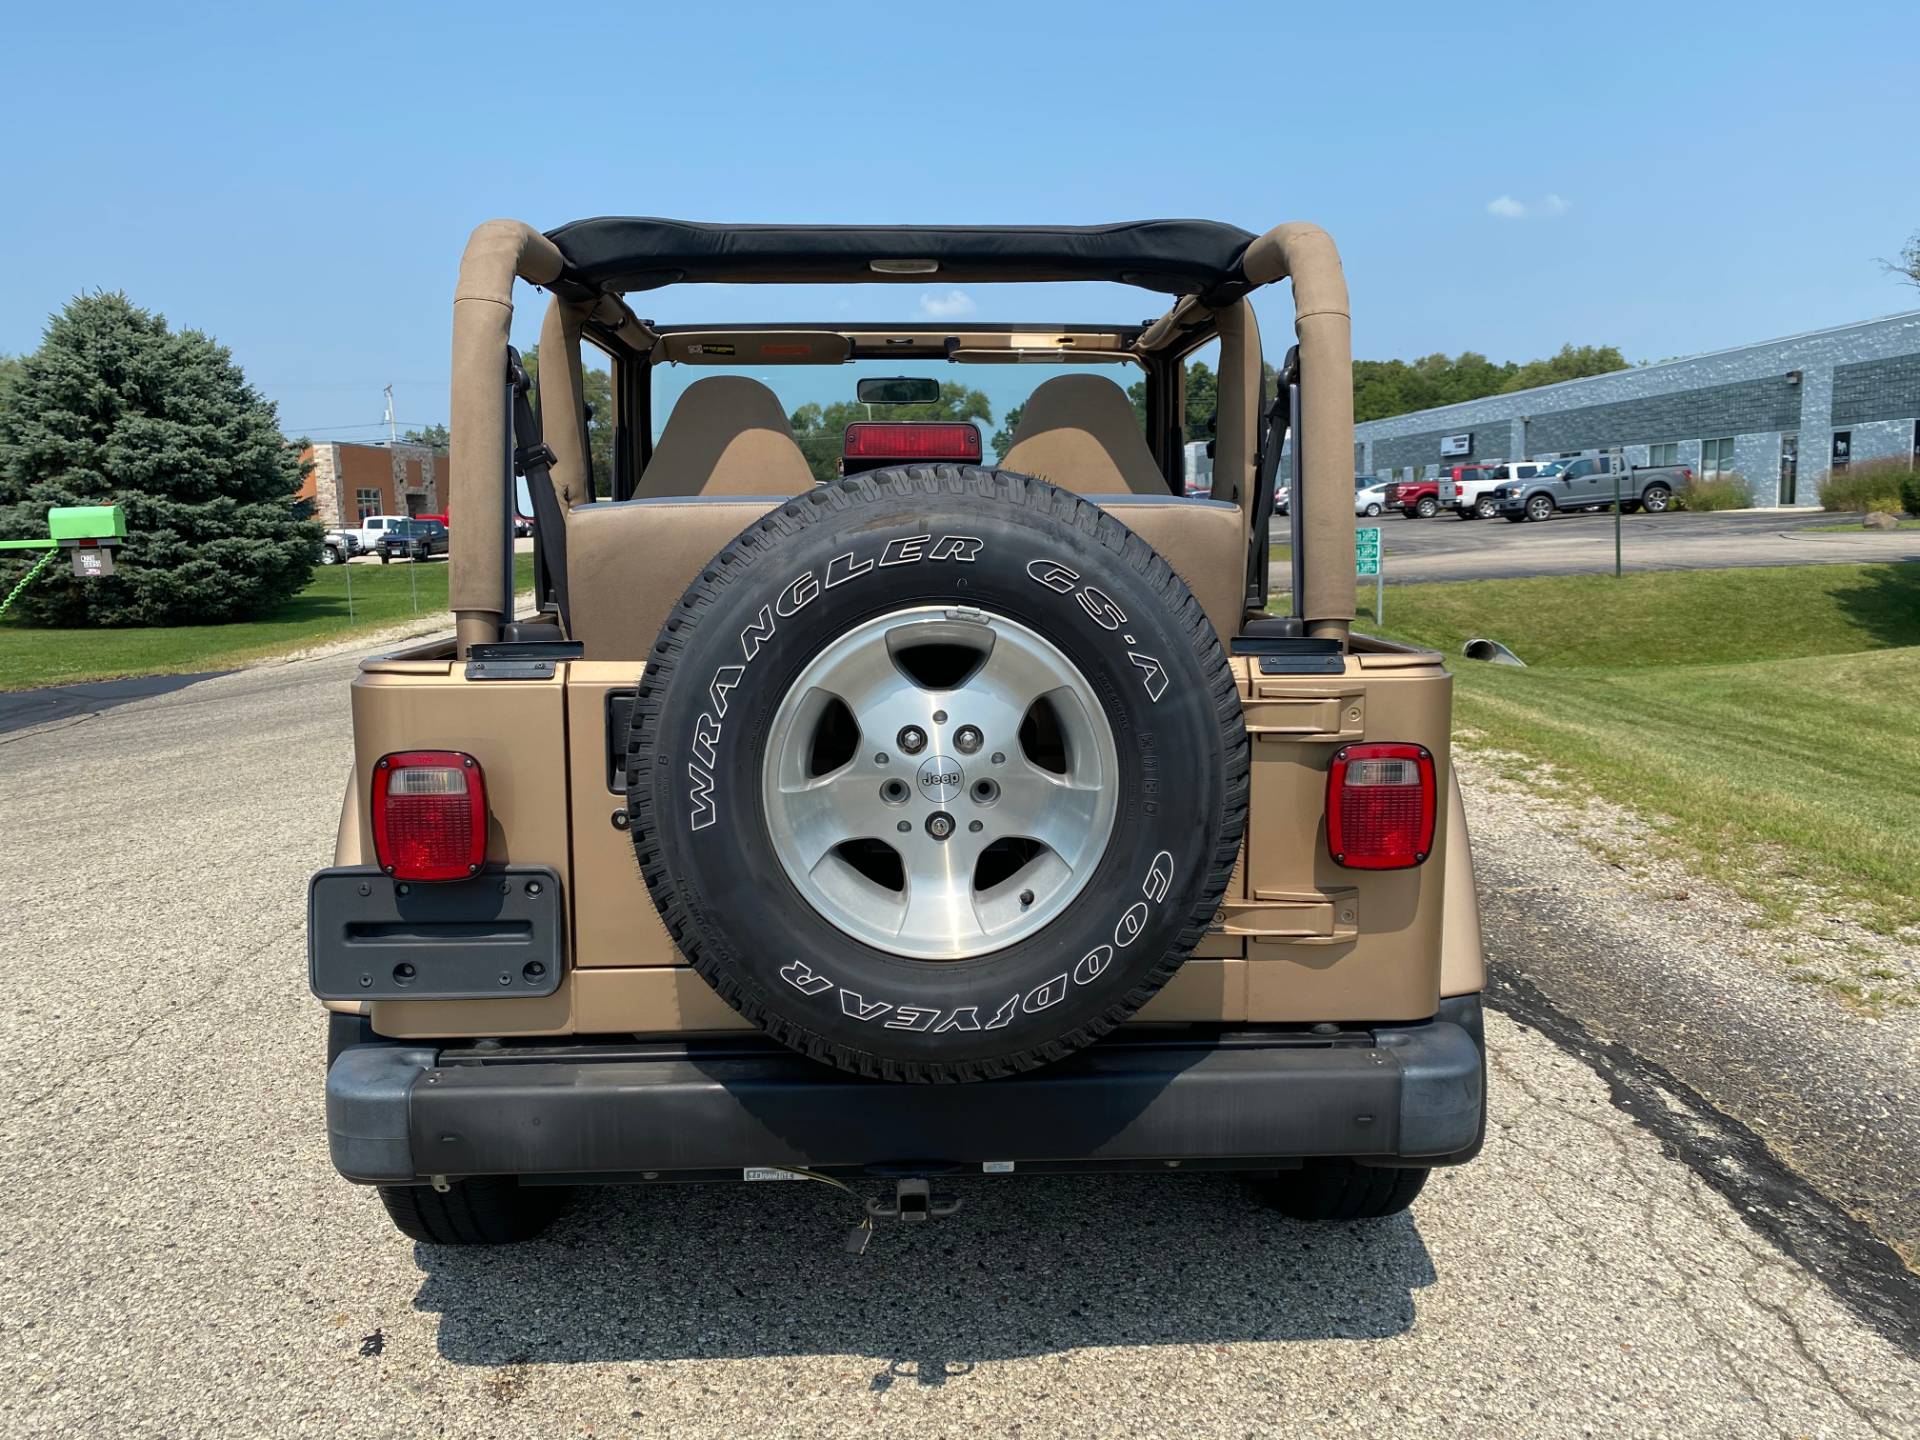 Used 1999 Jeep Wrangler Sahara 2dr 4WD SUV | Automobile in Big Bend WI |  4057 Desert Sand